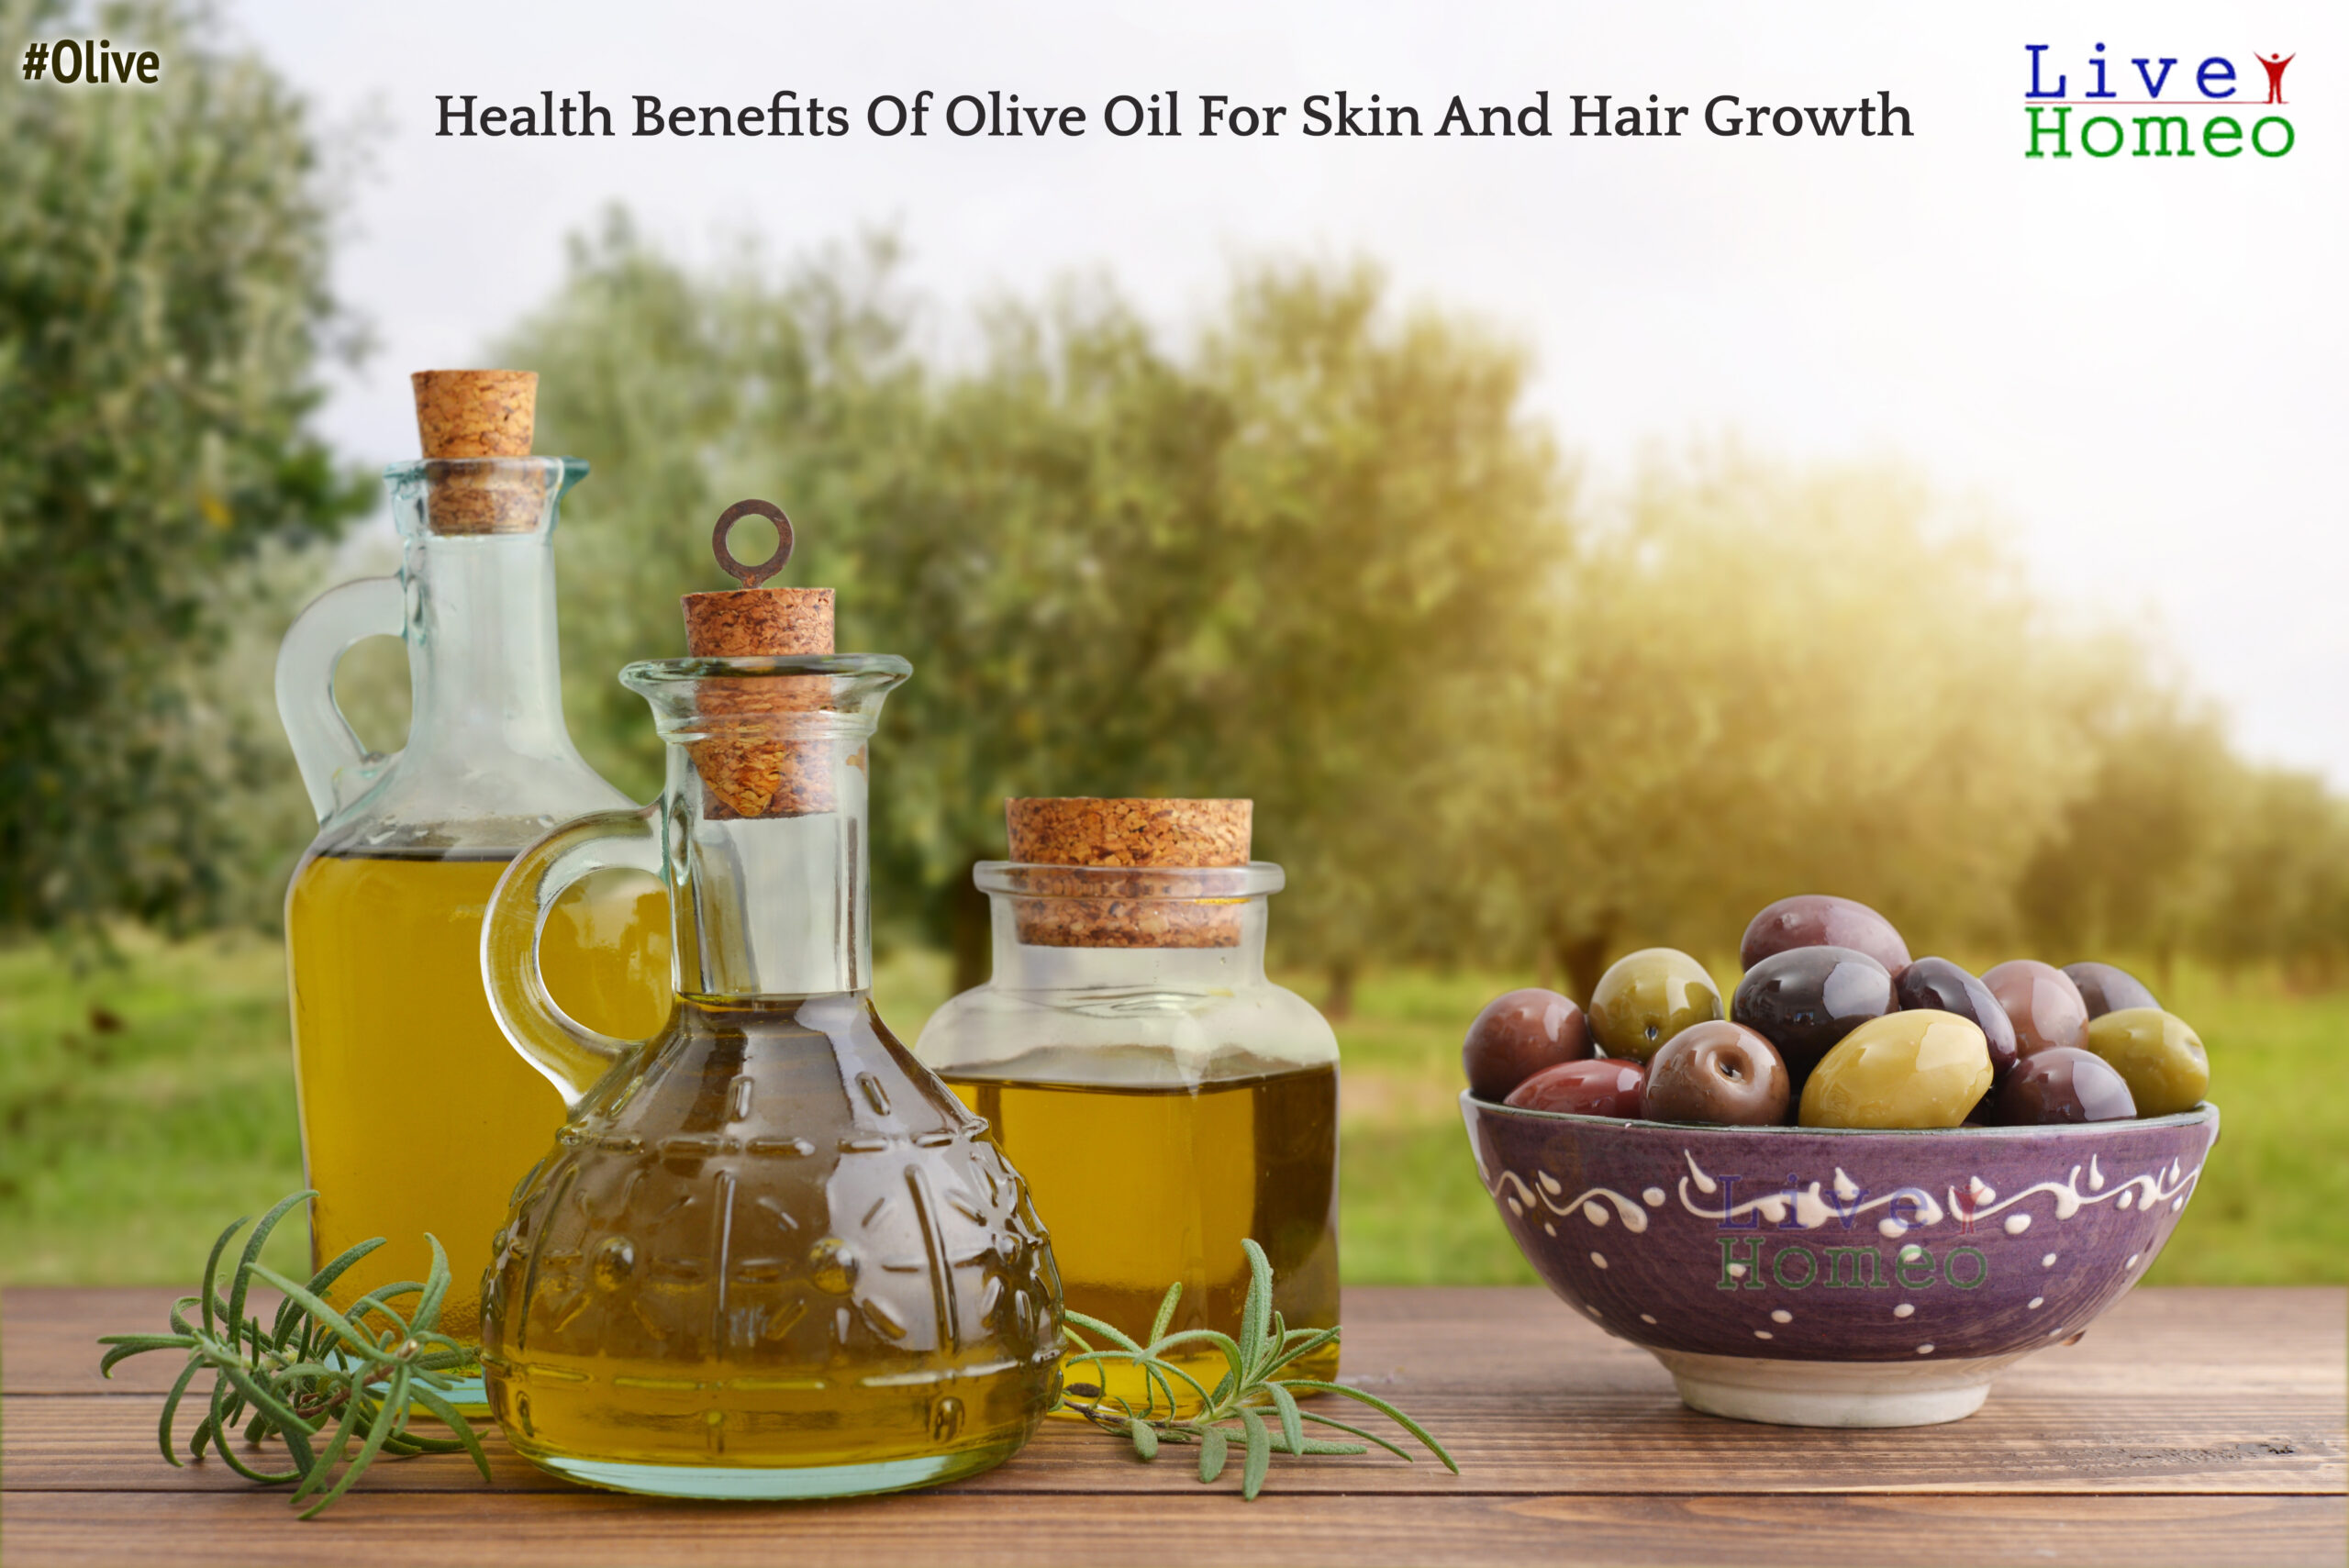 Health benefits of Olive oil for skin and hair growth – Live Homeo